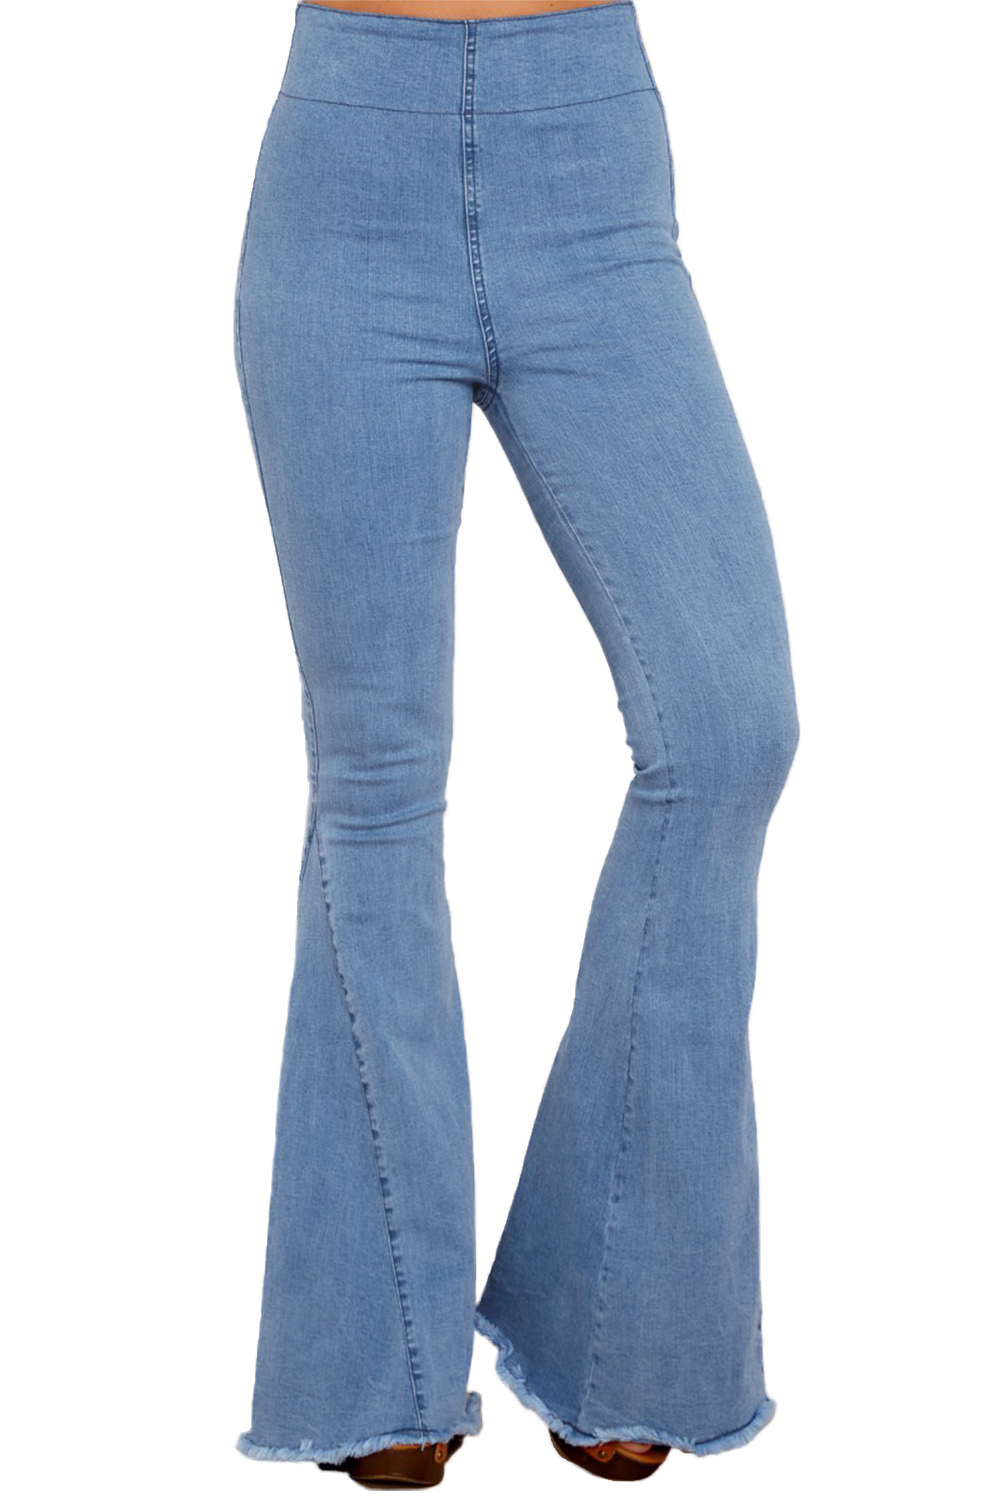 Stylish Blue Flare Jeans, buy jeans and a nice top online